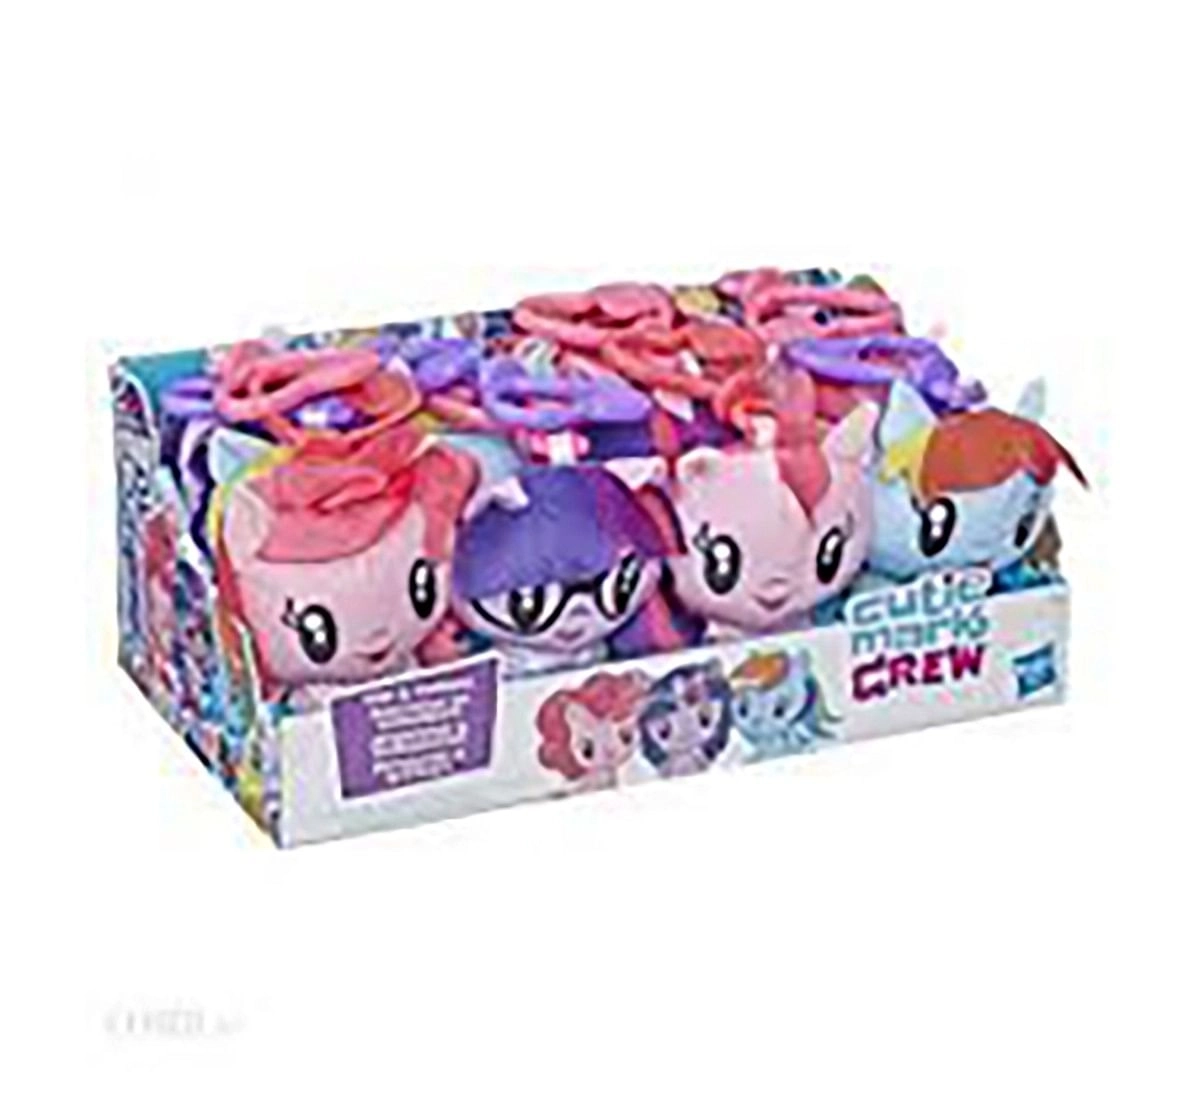 My Little Pony : Cutie Mark Crew Plush Clip Assorted Collectible Dolls for Girls age 3Y+ 